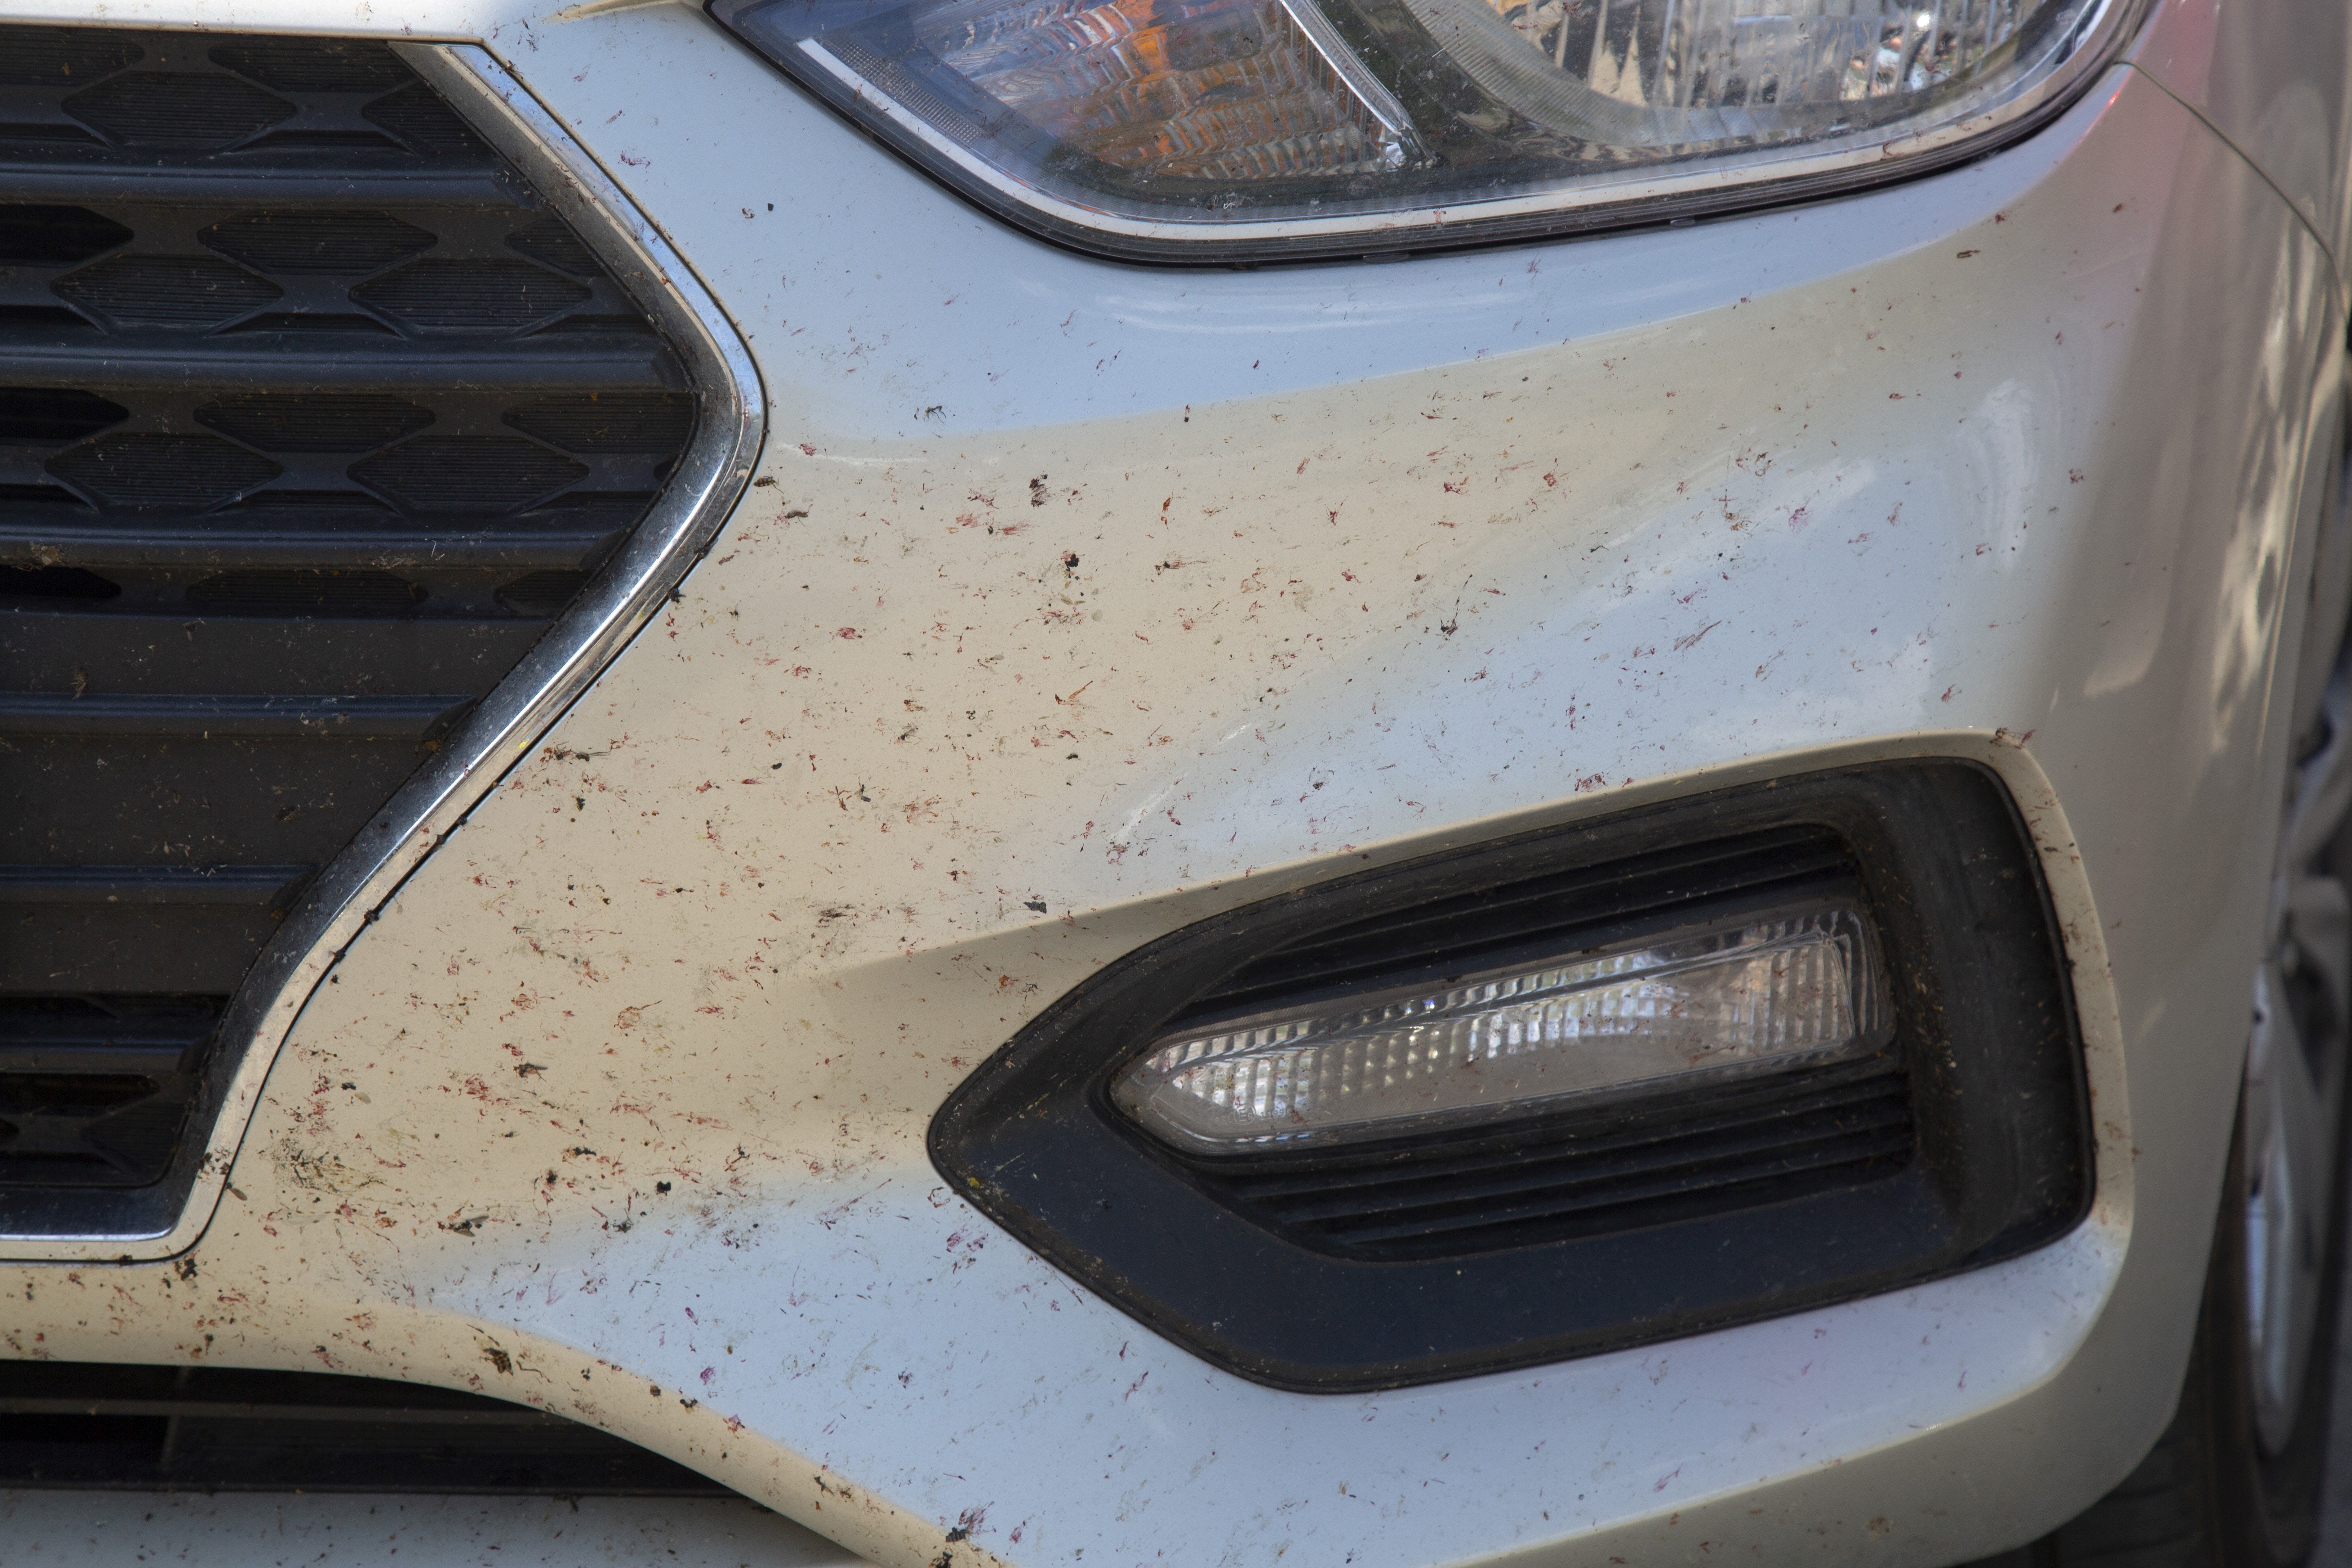 Bugs on Front of Dirty Car